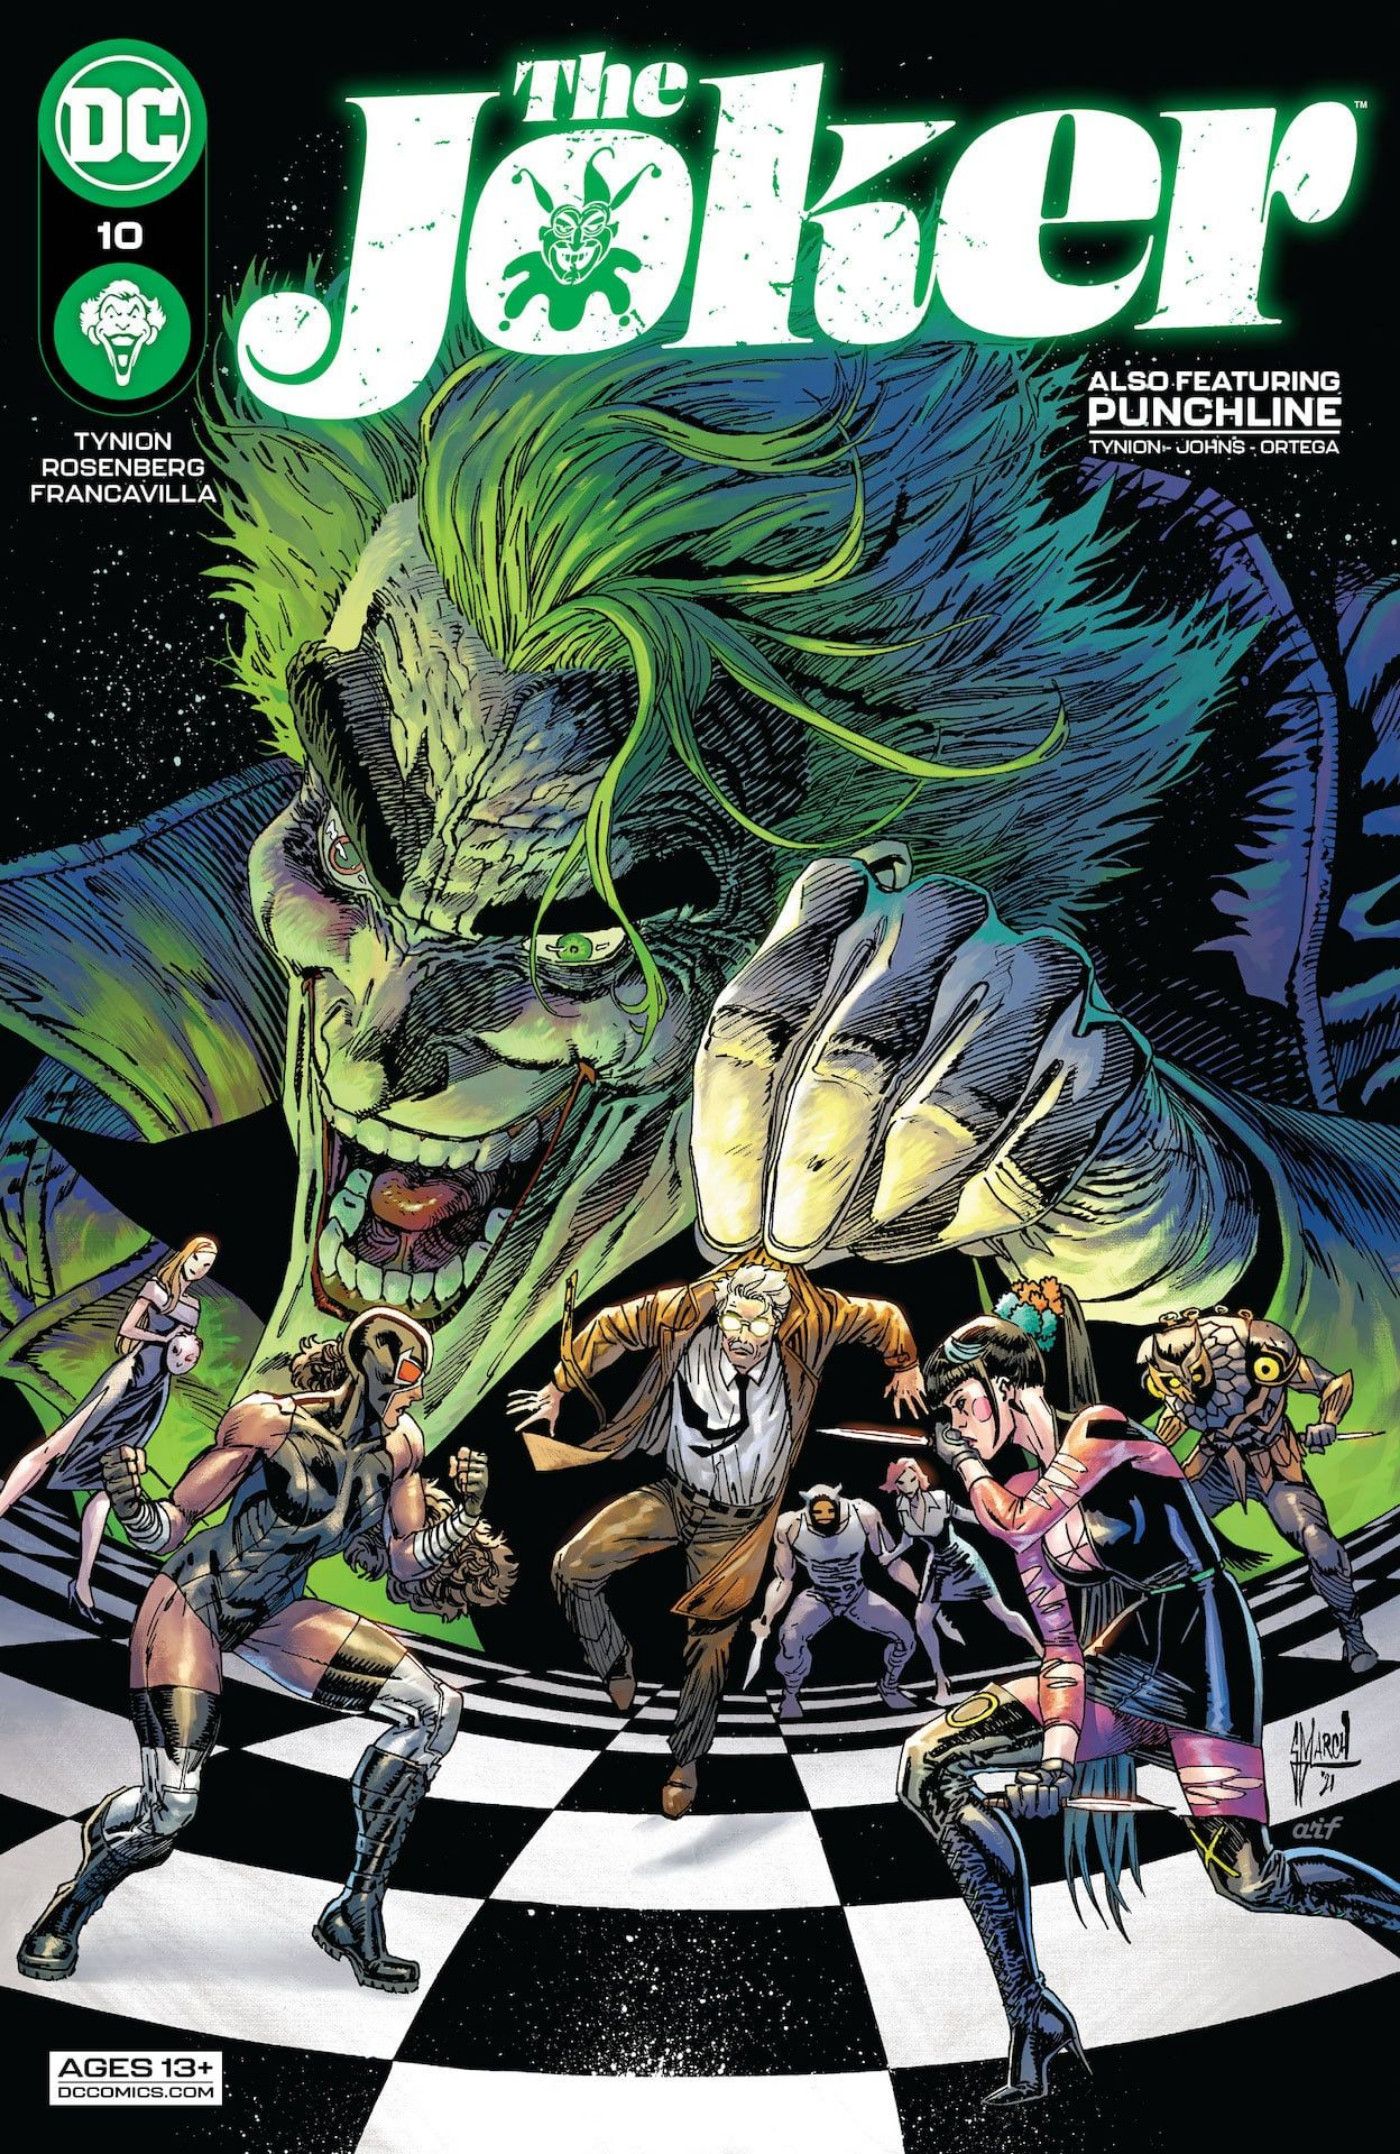 Joker 10 Preview cover, showing the Joker moving various characters around like chess pieces